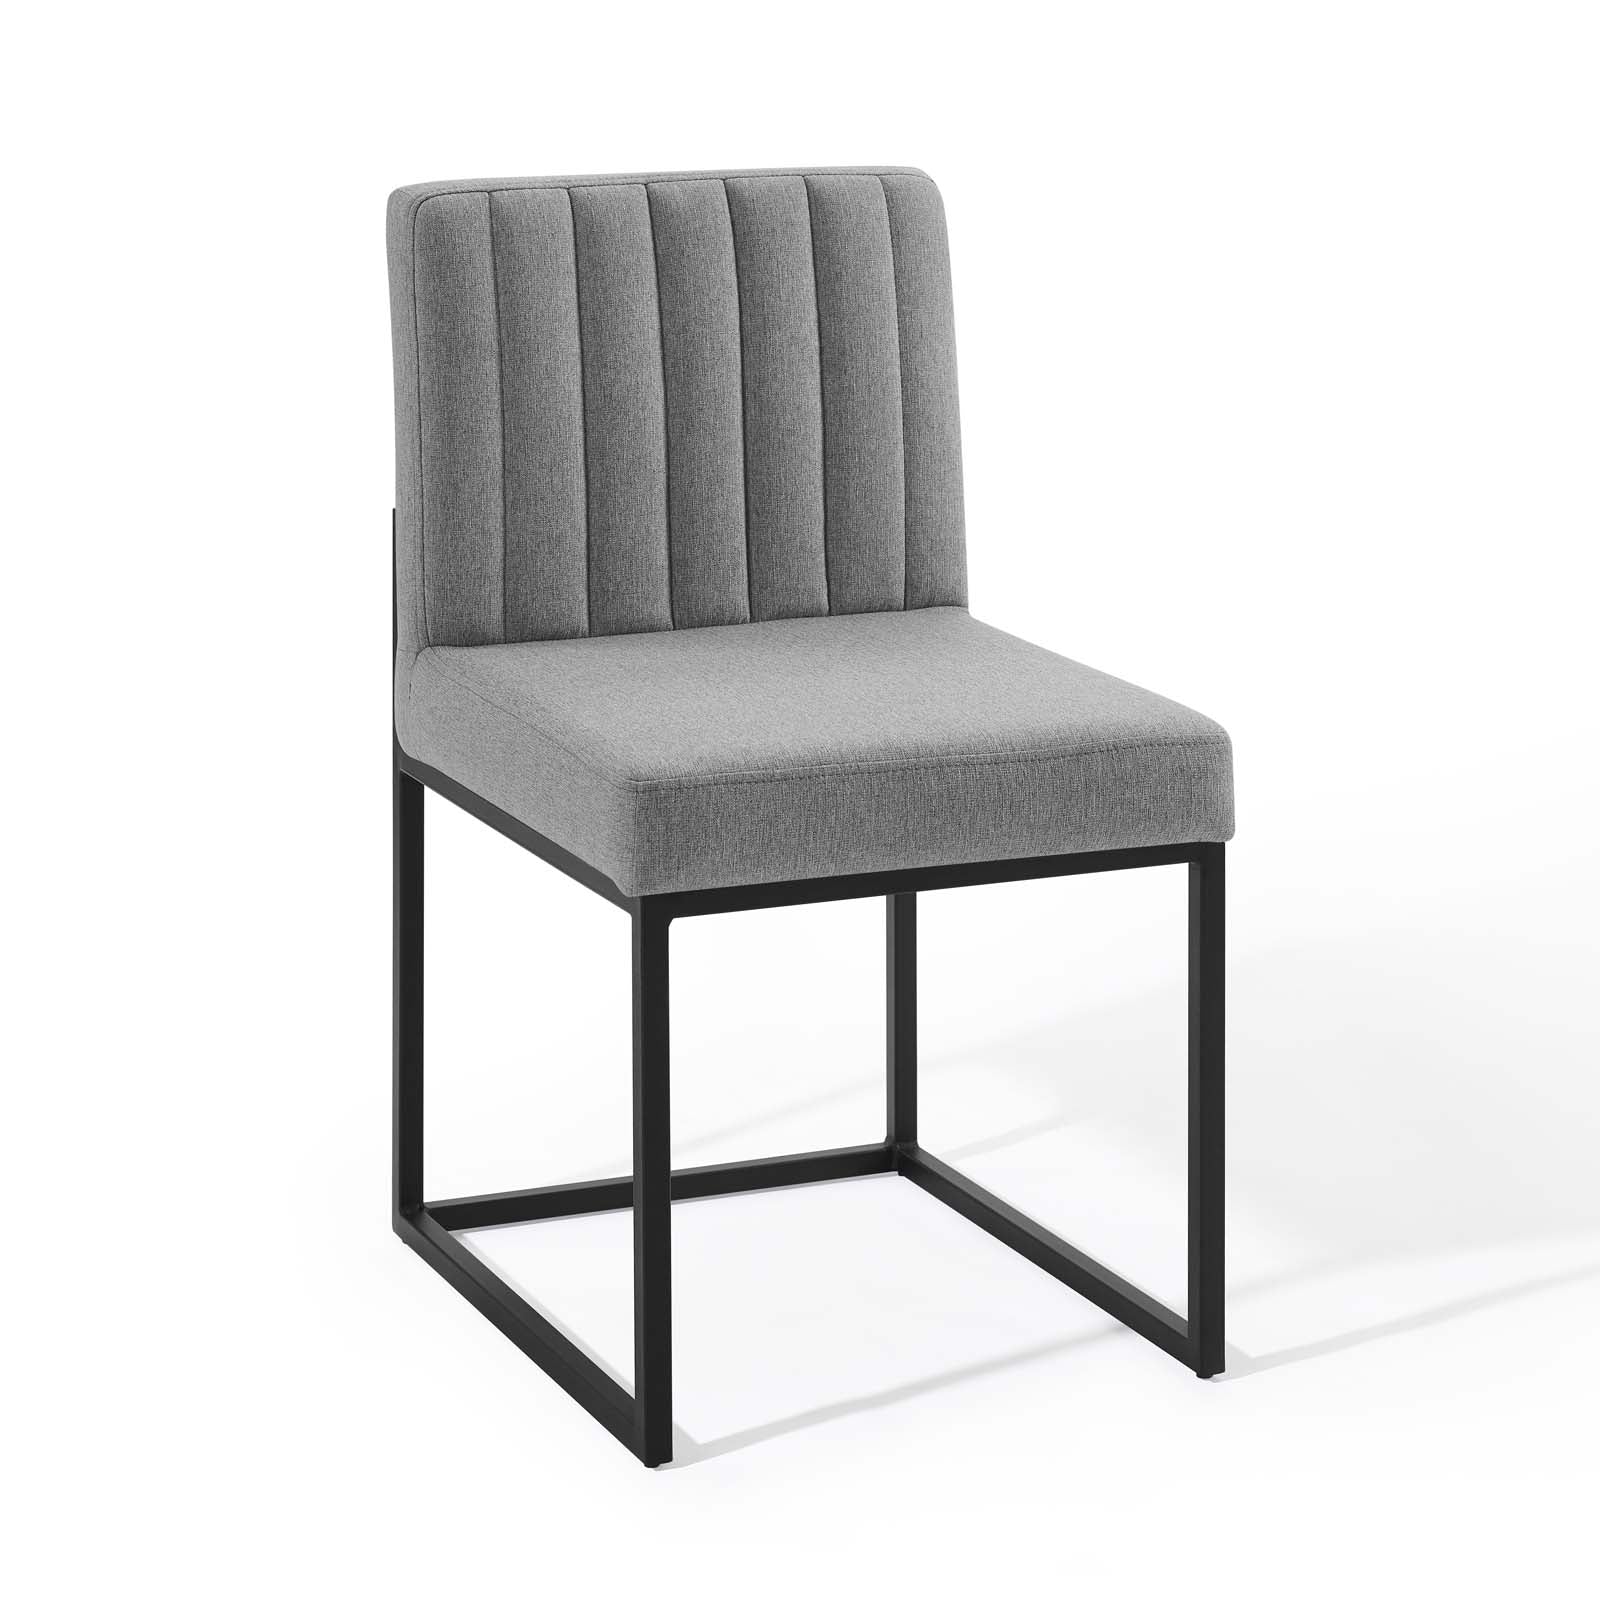 Carriage Dining Chair Upholstered Fabric Set of 2 - East Shore Modern Home Furnishings